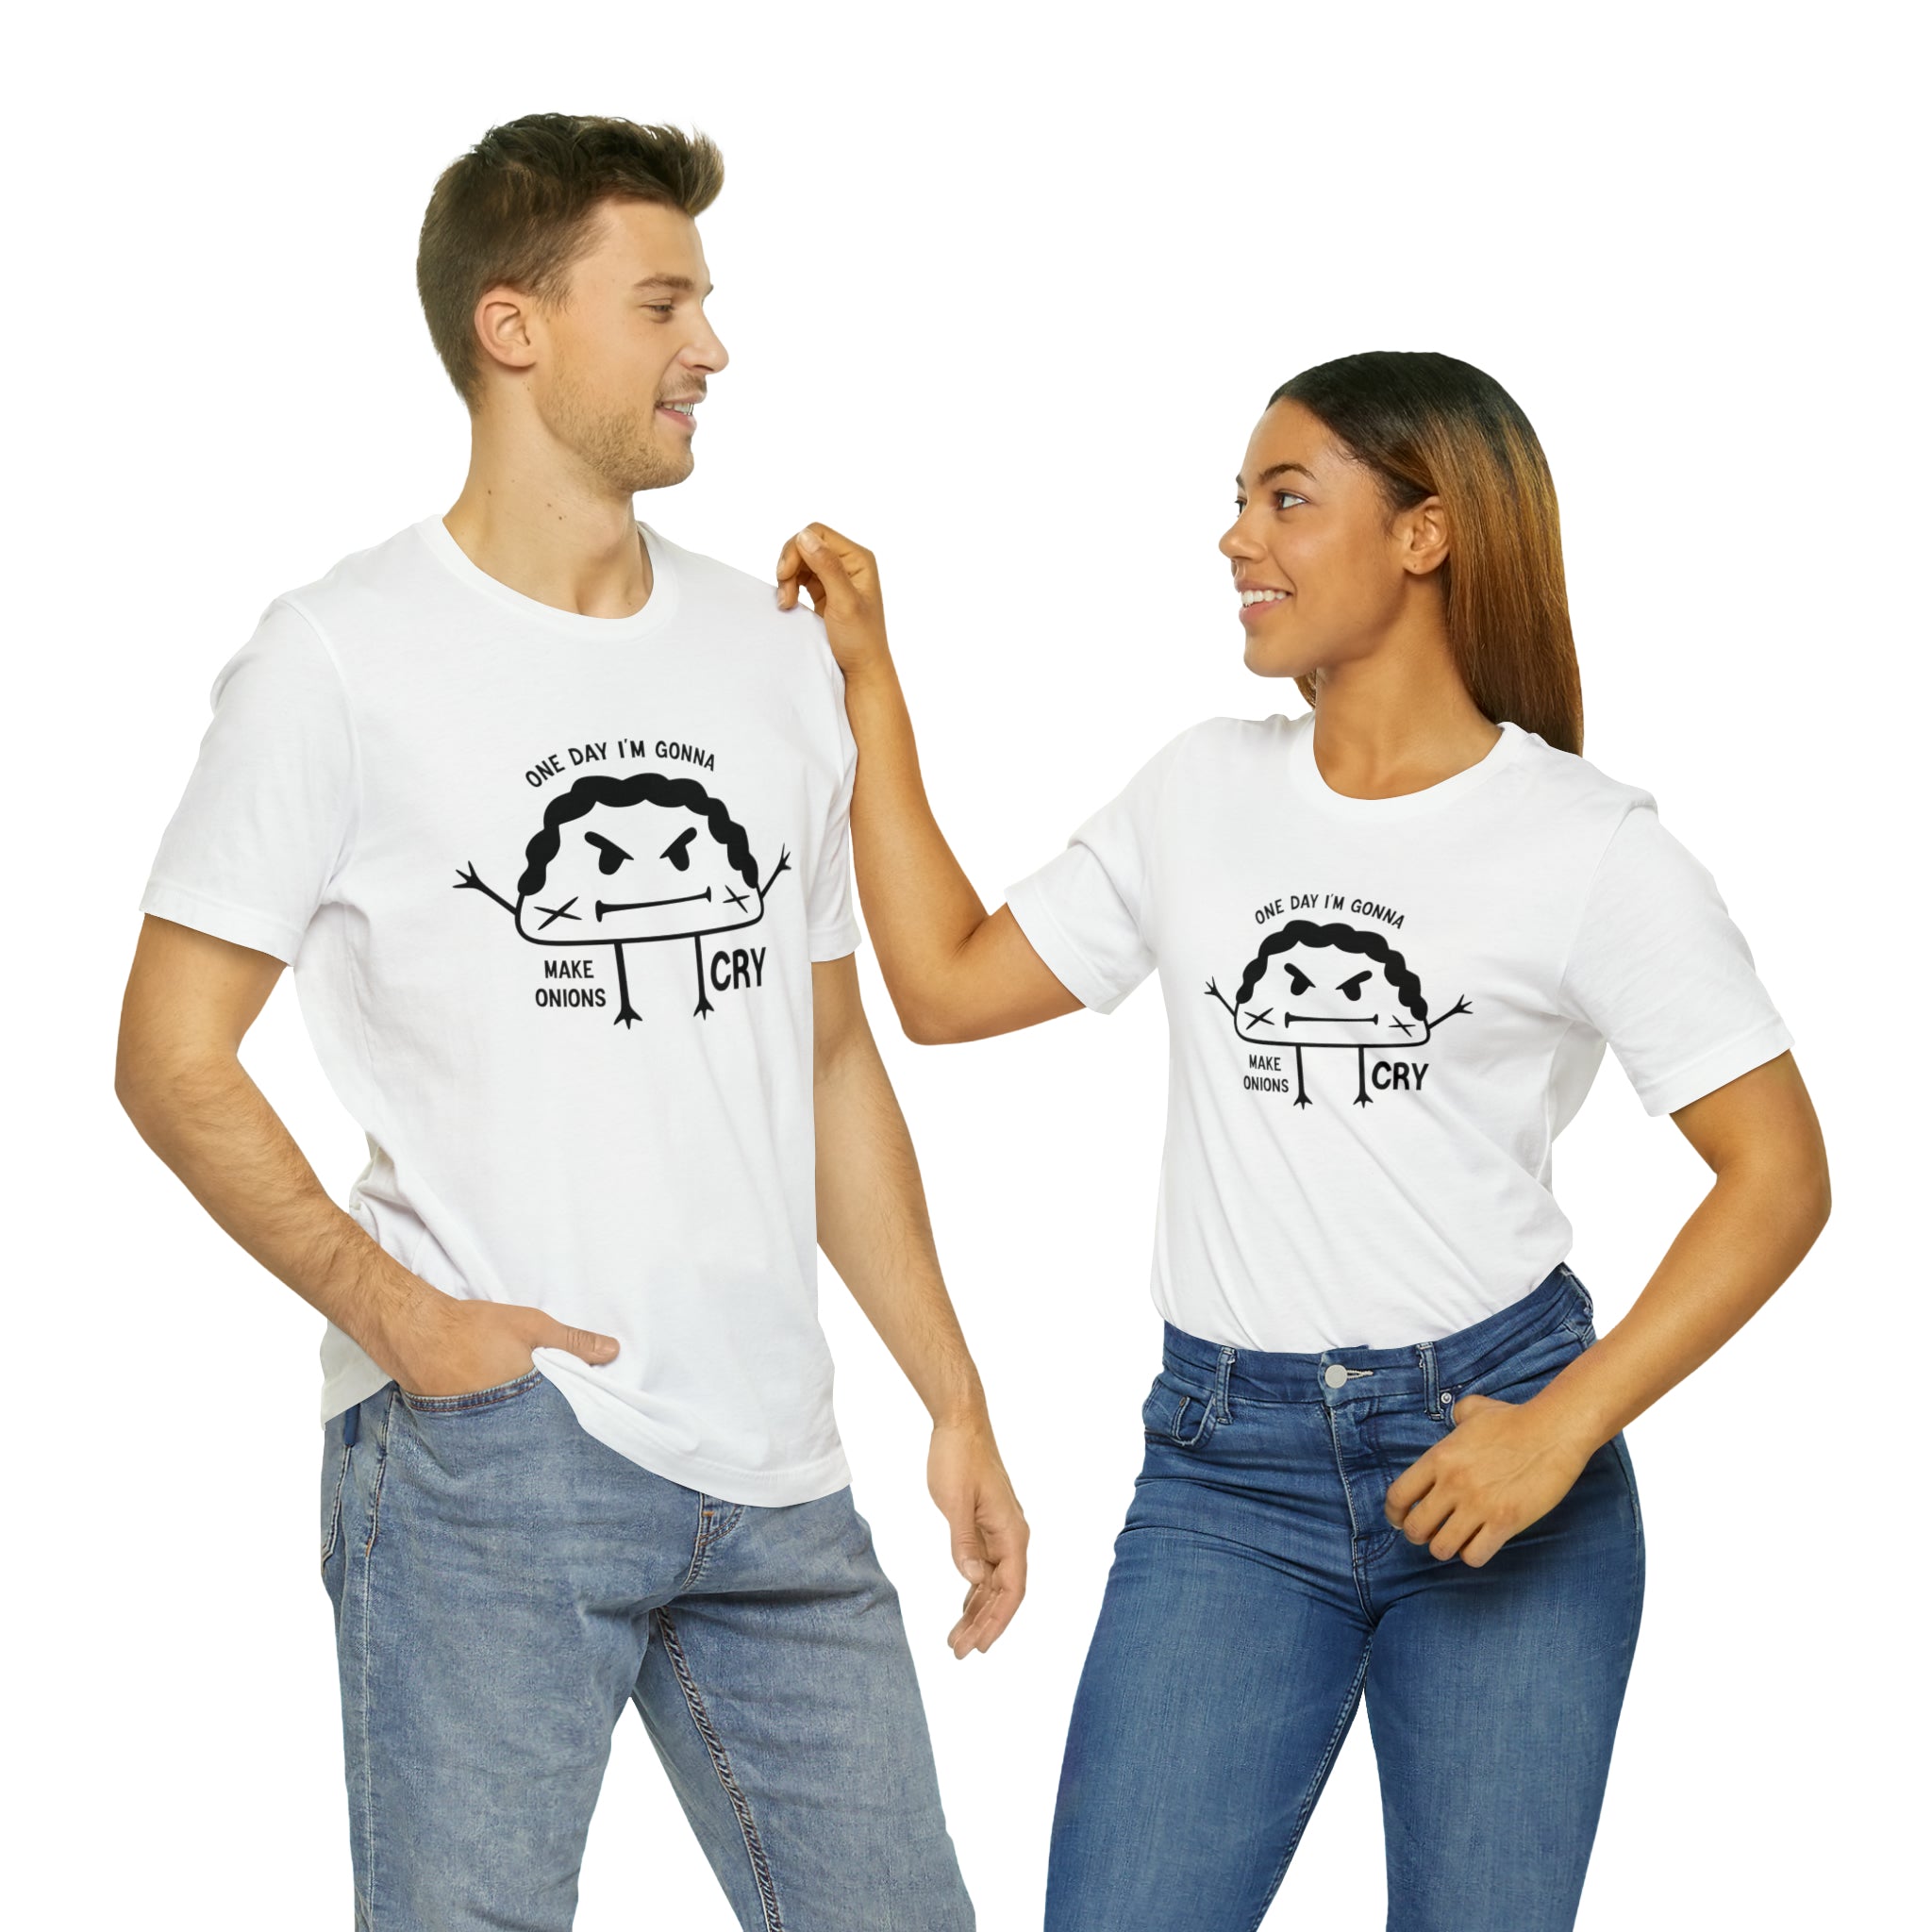 Two people standing next to each other wearing the "One Day Im Gonna Make Onions Cry" T-Shirt.